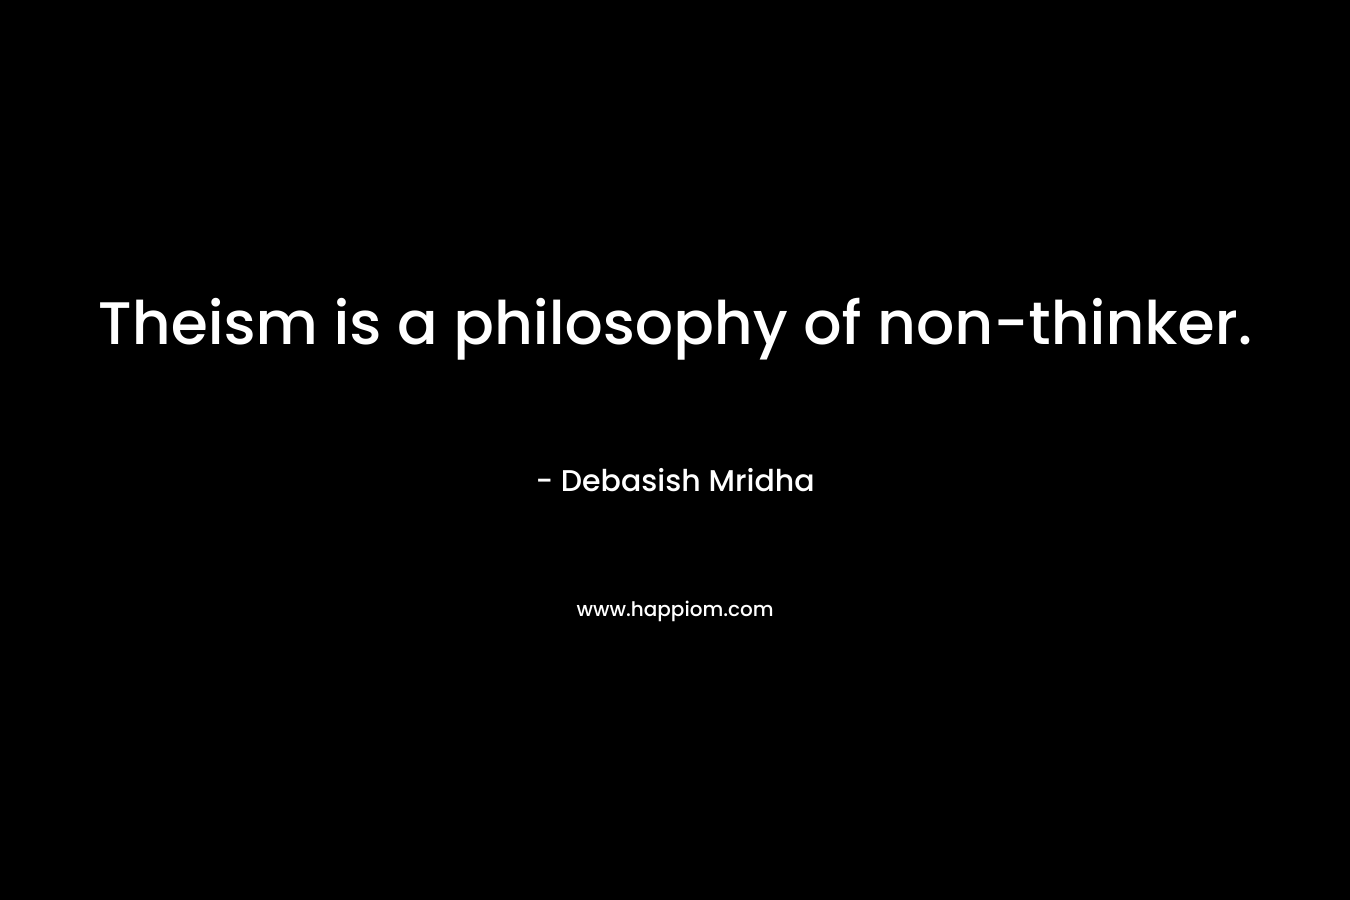 Theism is a philosophy of non-thinker. – Debasish Mridha